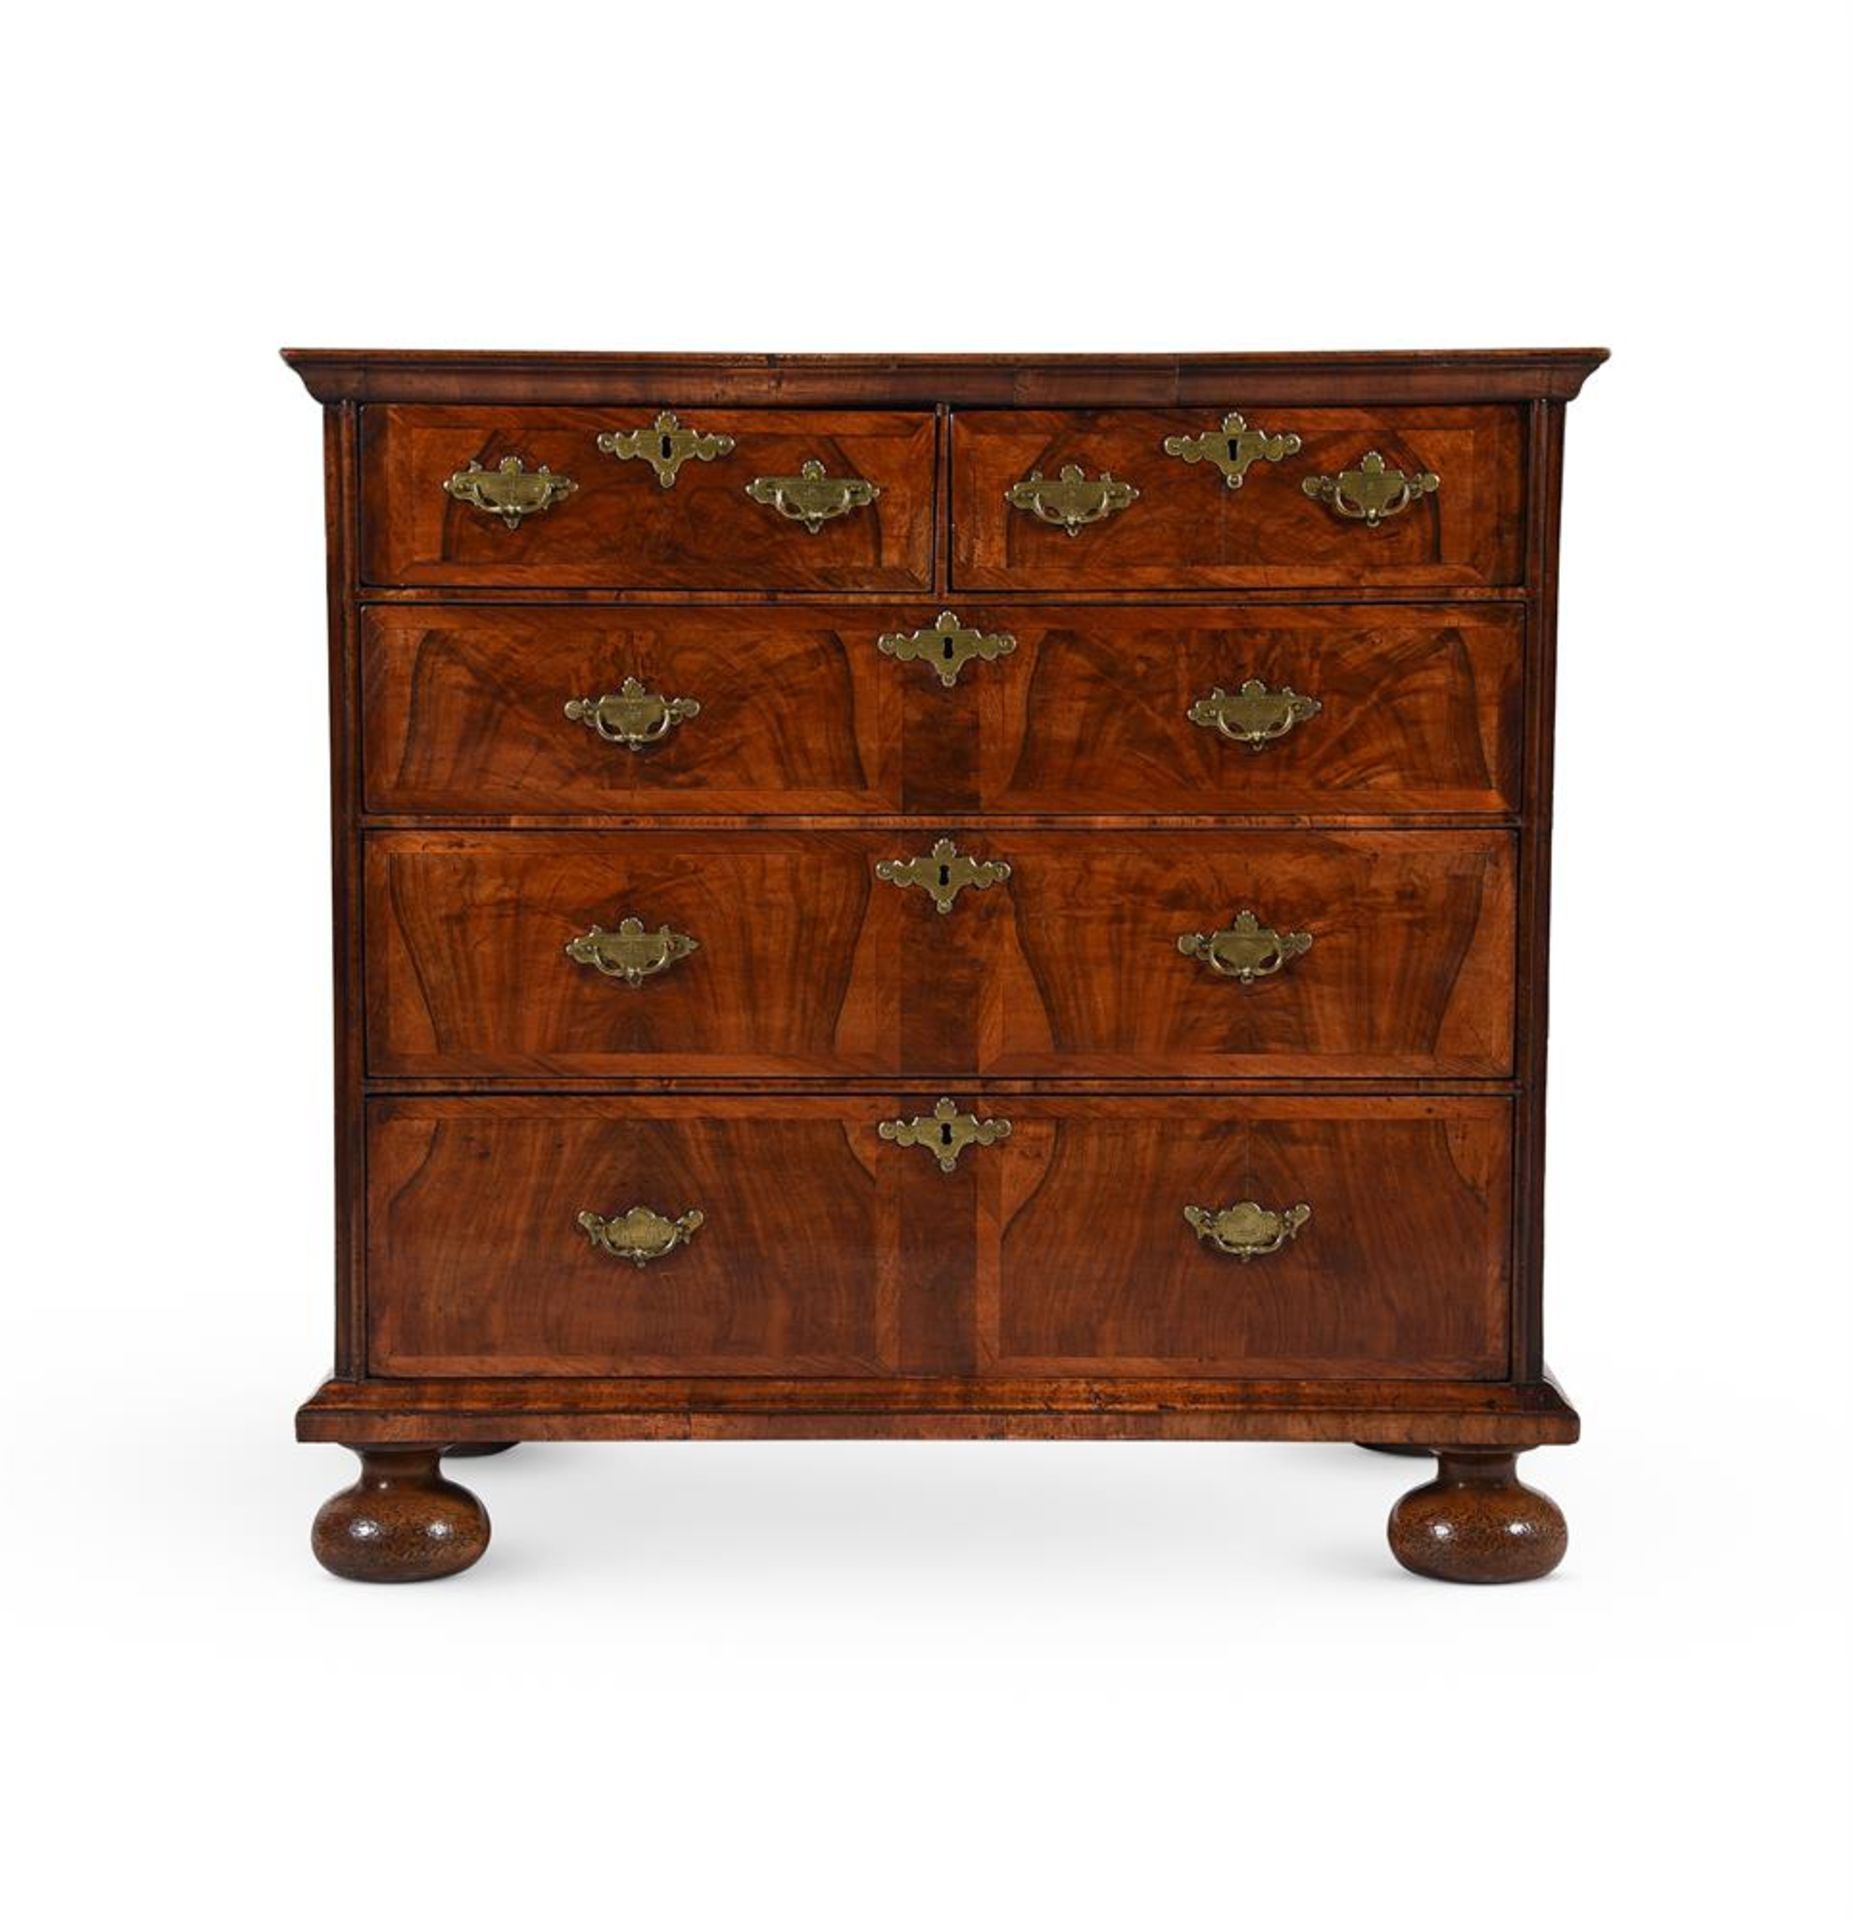 A QUEEN ANNE FIGURED WALNUT AND FEATHER-BANDED CHEST OF DRAWERS, CIRCA 1710